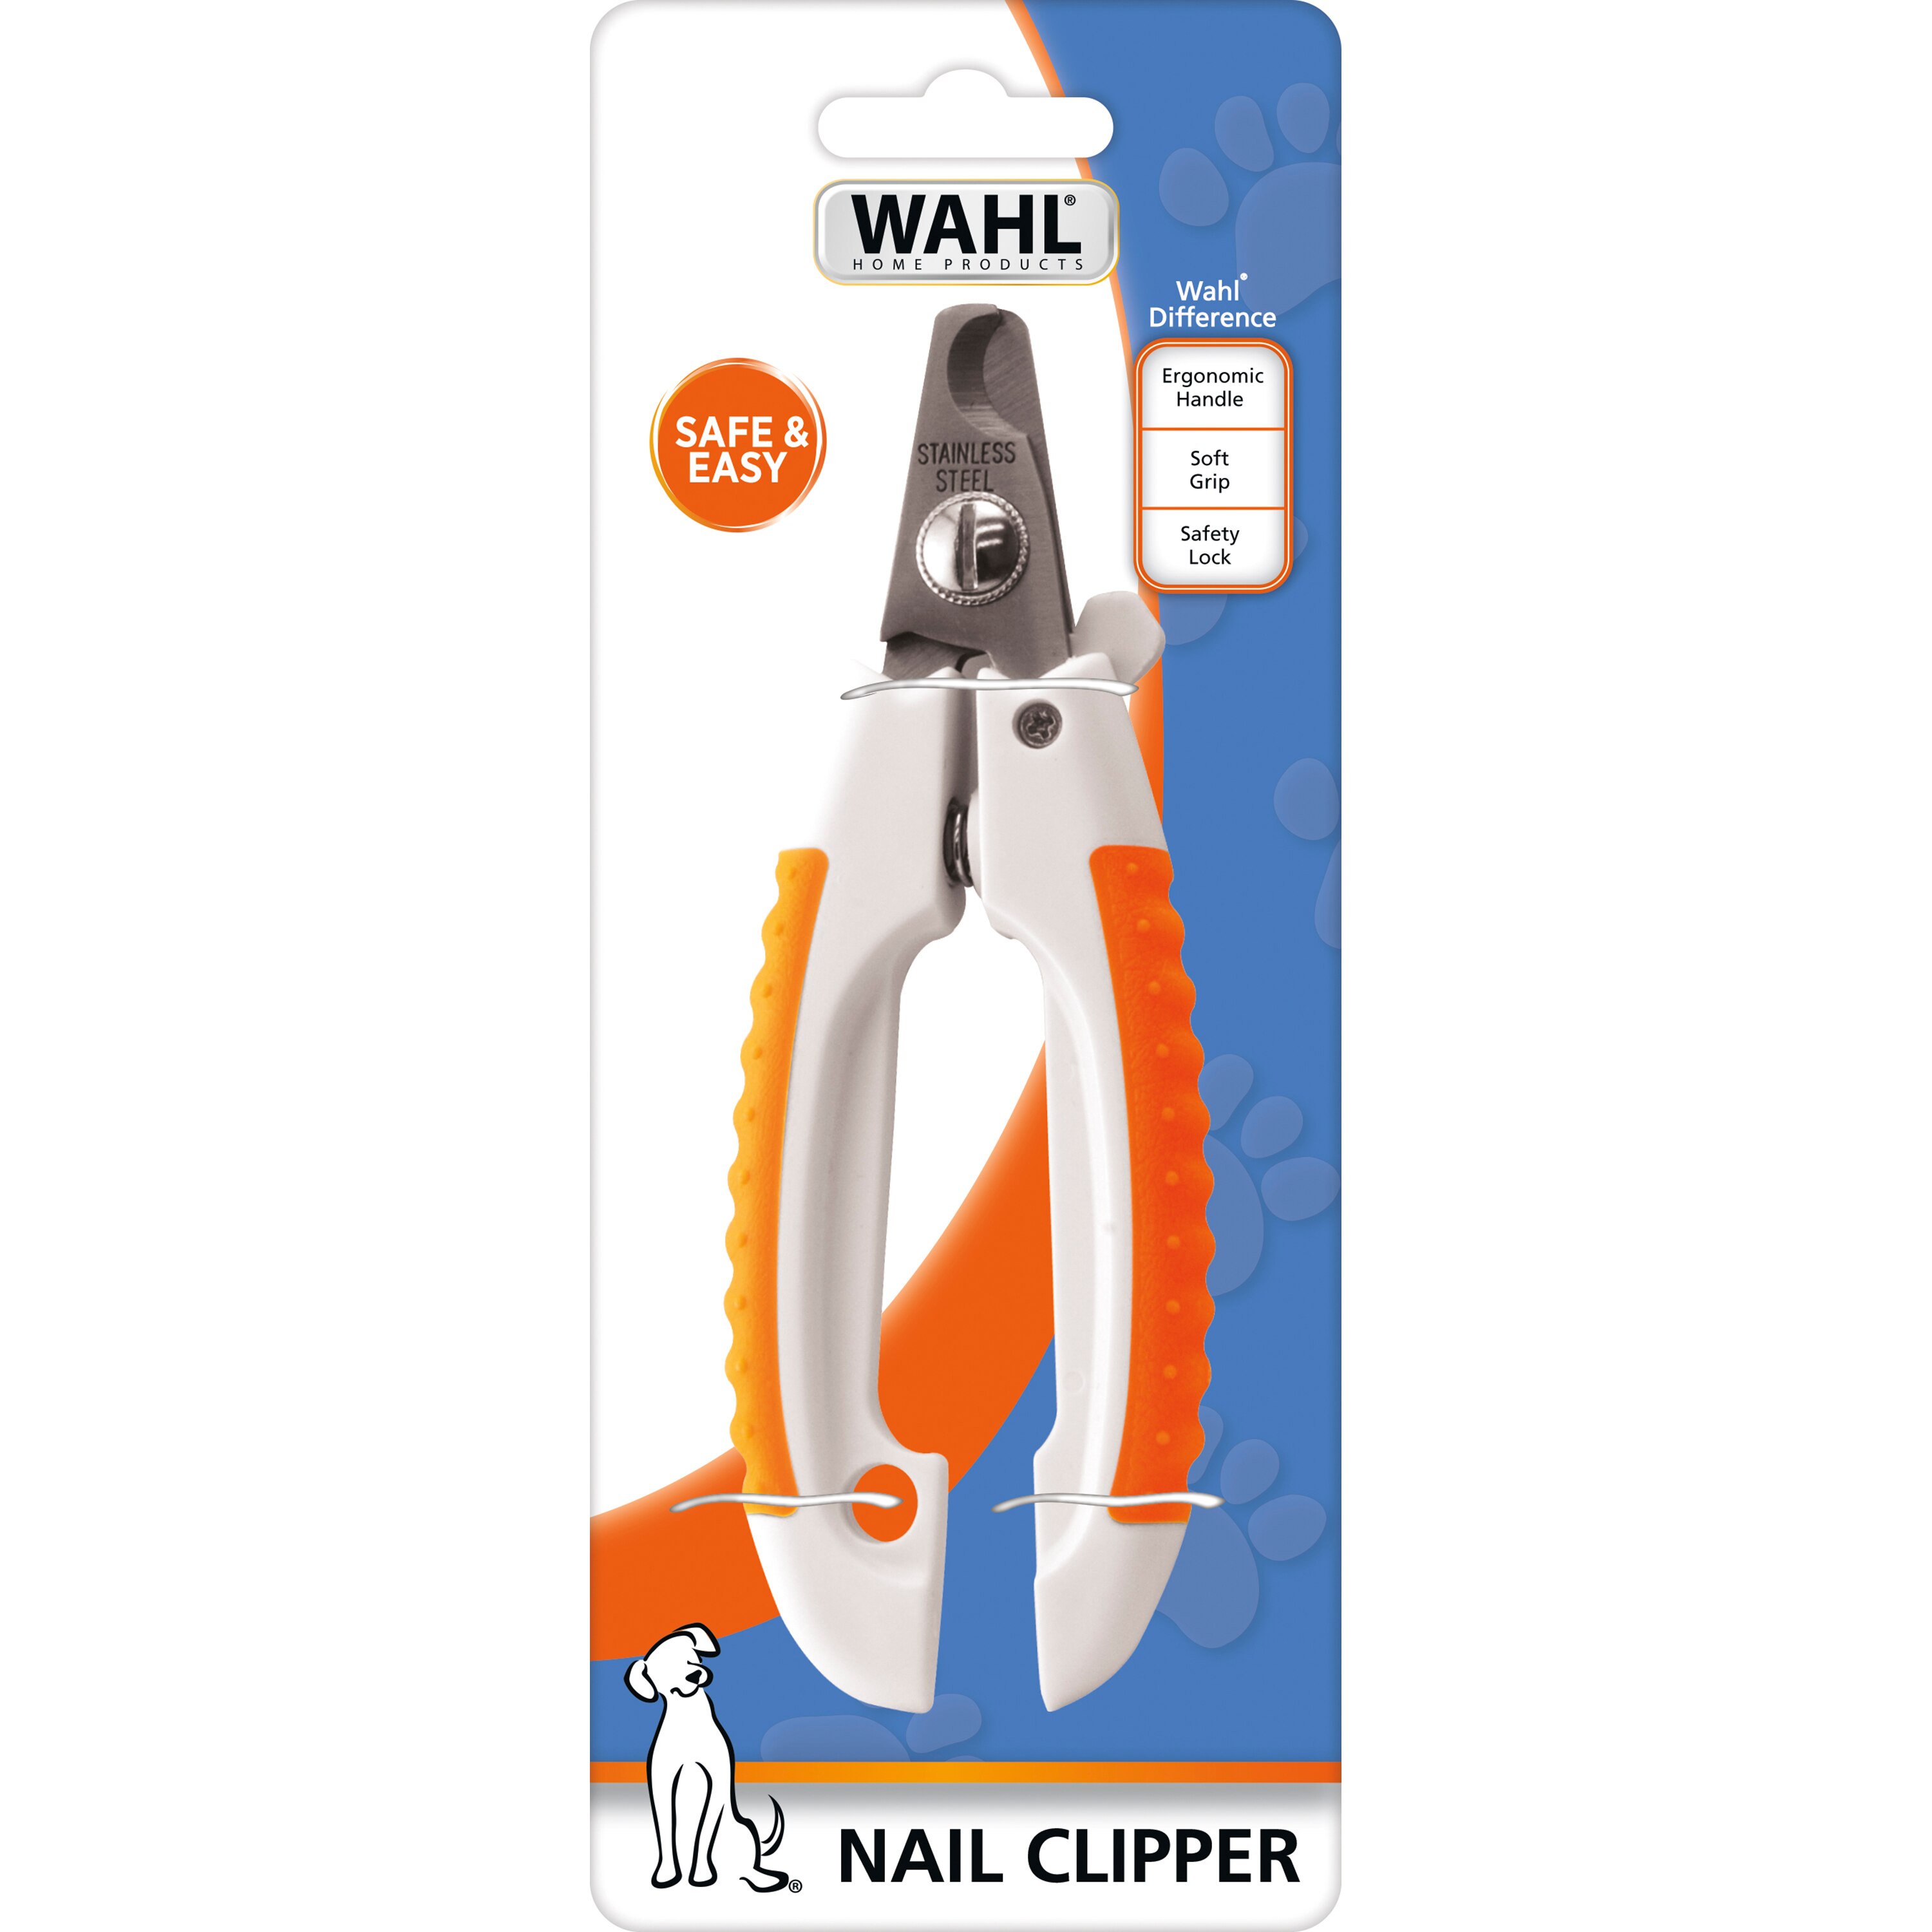 Wahl Pet Nail Clipper For Cutting Dog, Cat, & Animal Claws , CVS